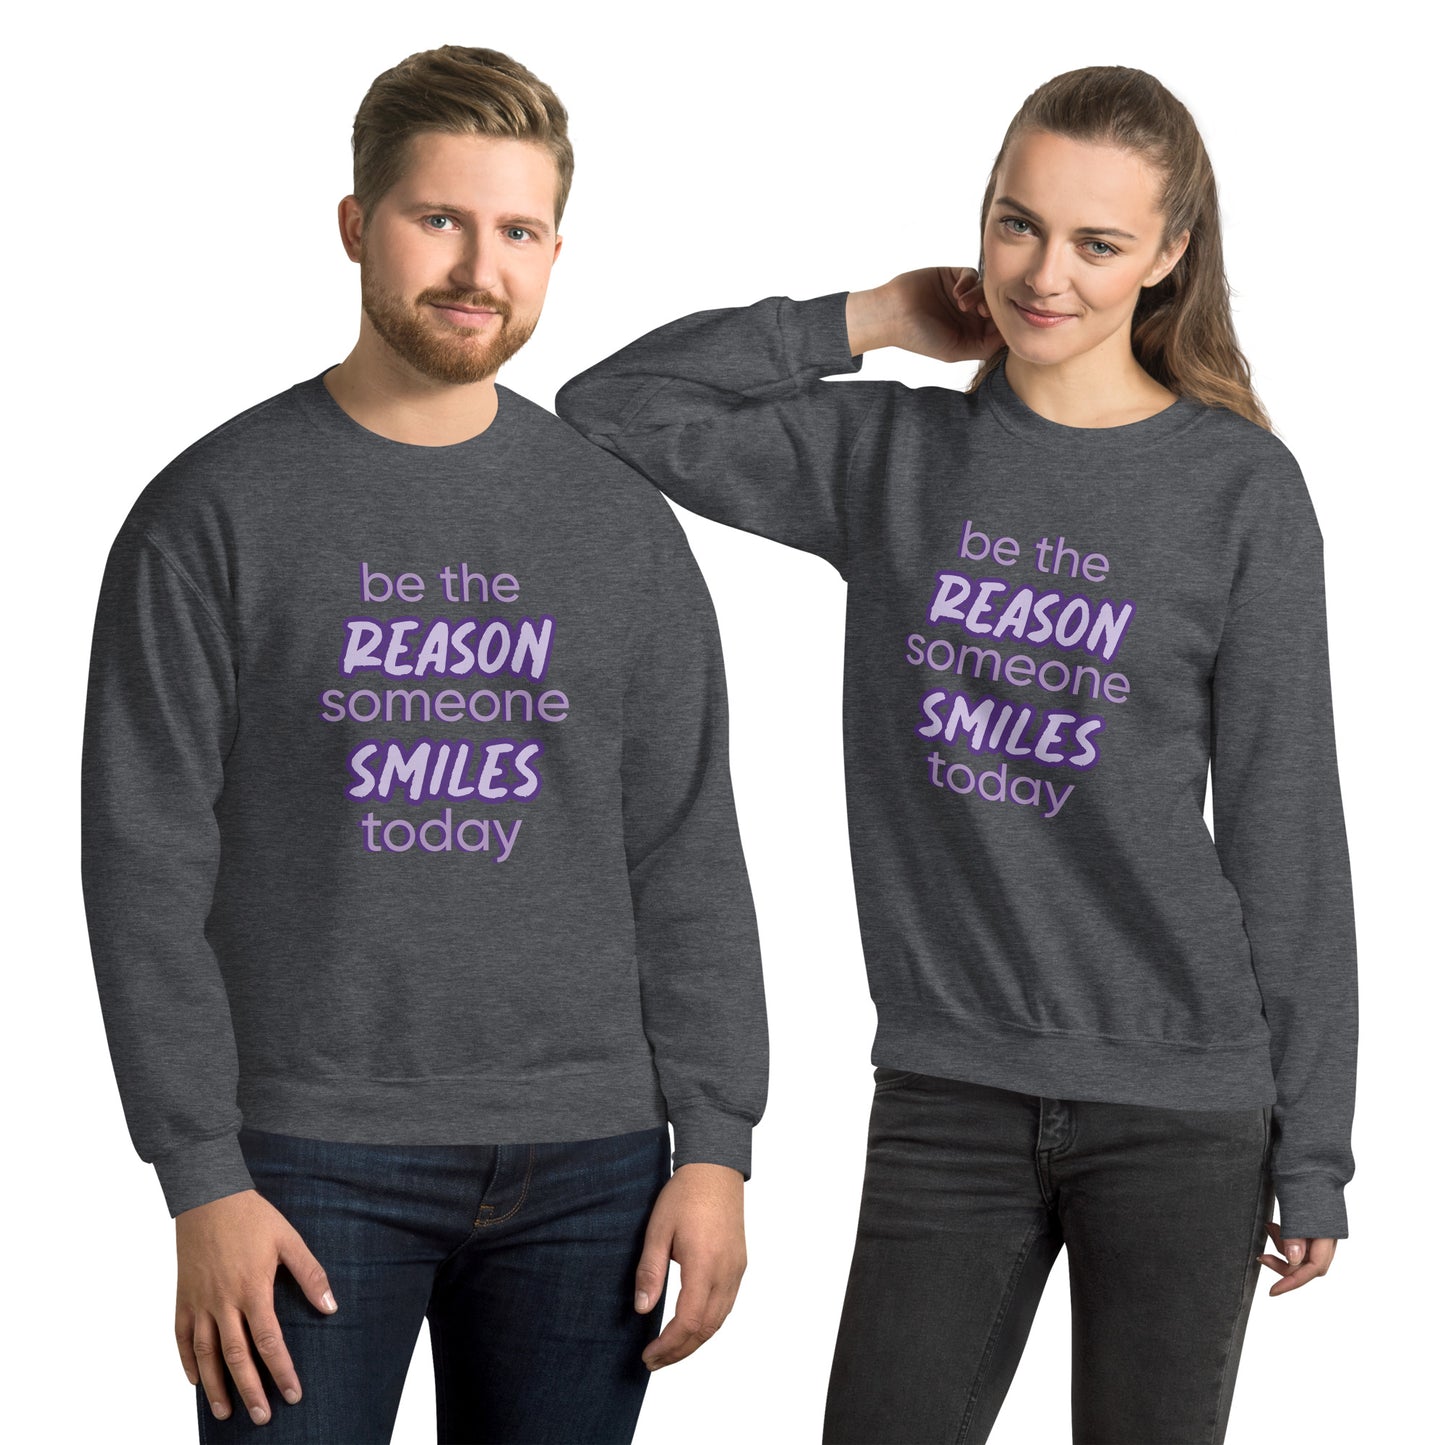 Men and women with dark grey sweater and the quote "be the reason someone smiles today" in purple on it. 